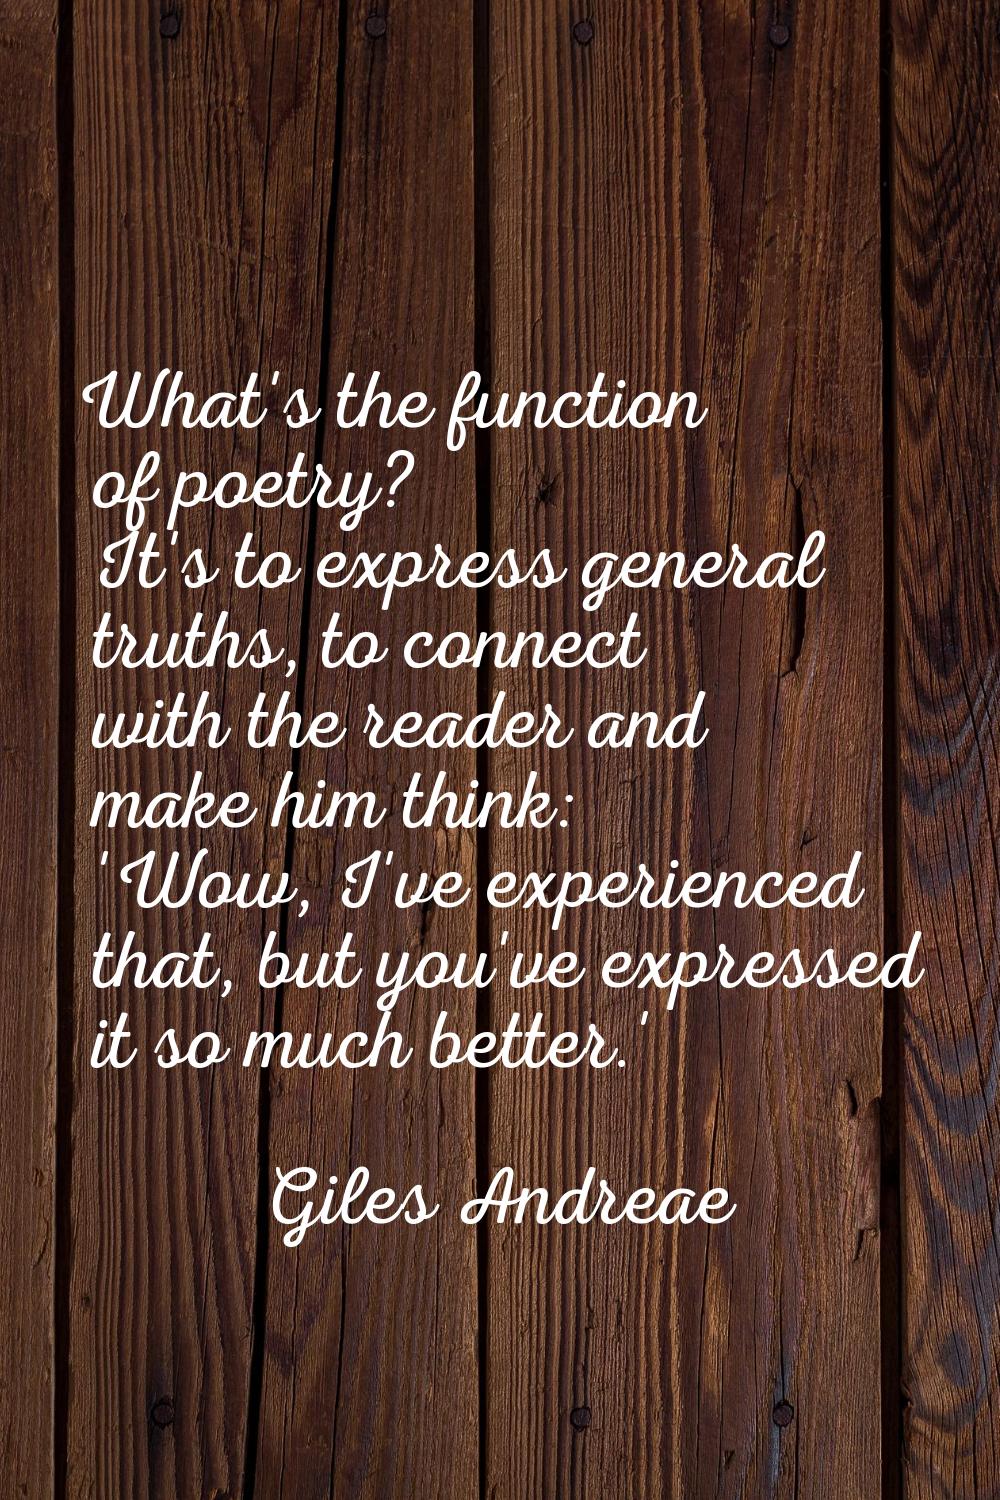 What's the function of poetry? It's to express general truths, to connect with the reader and make 